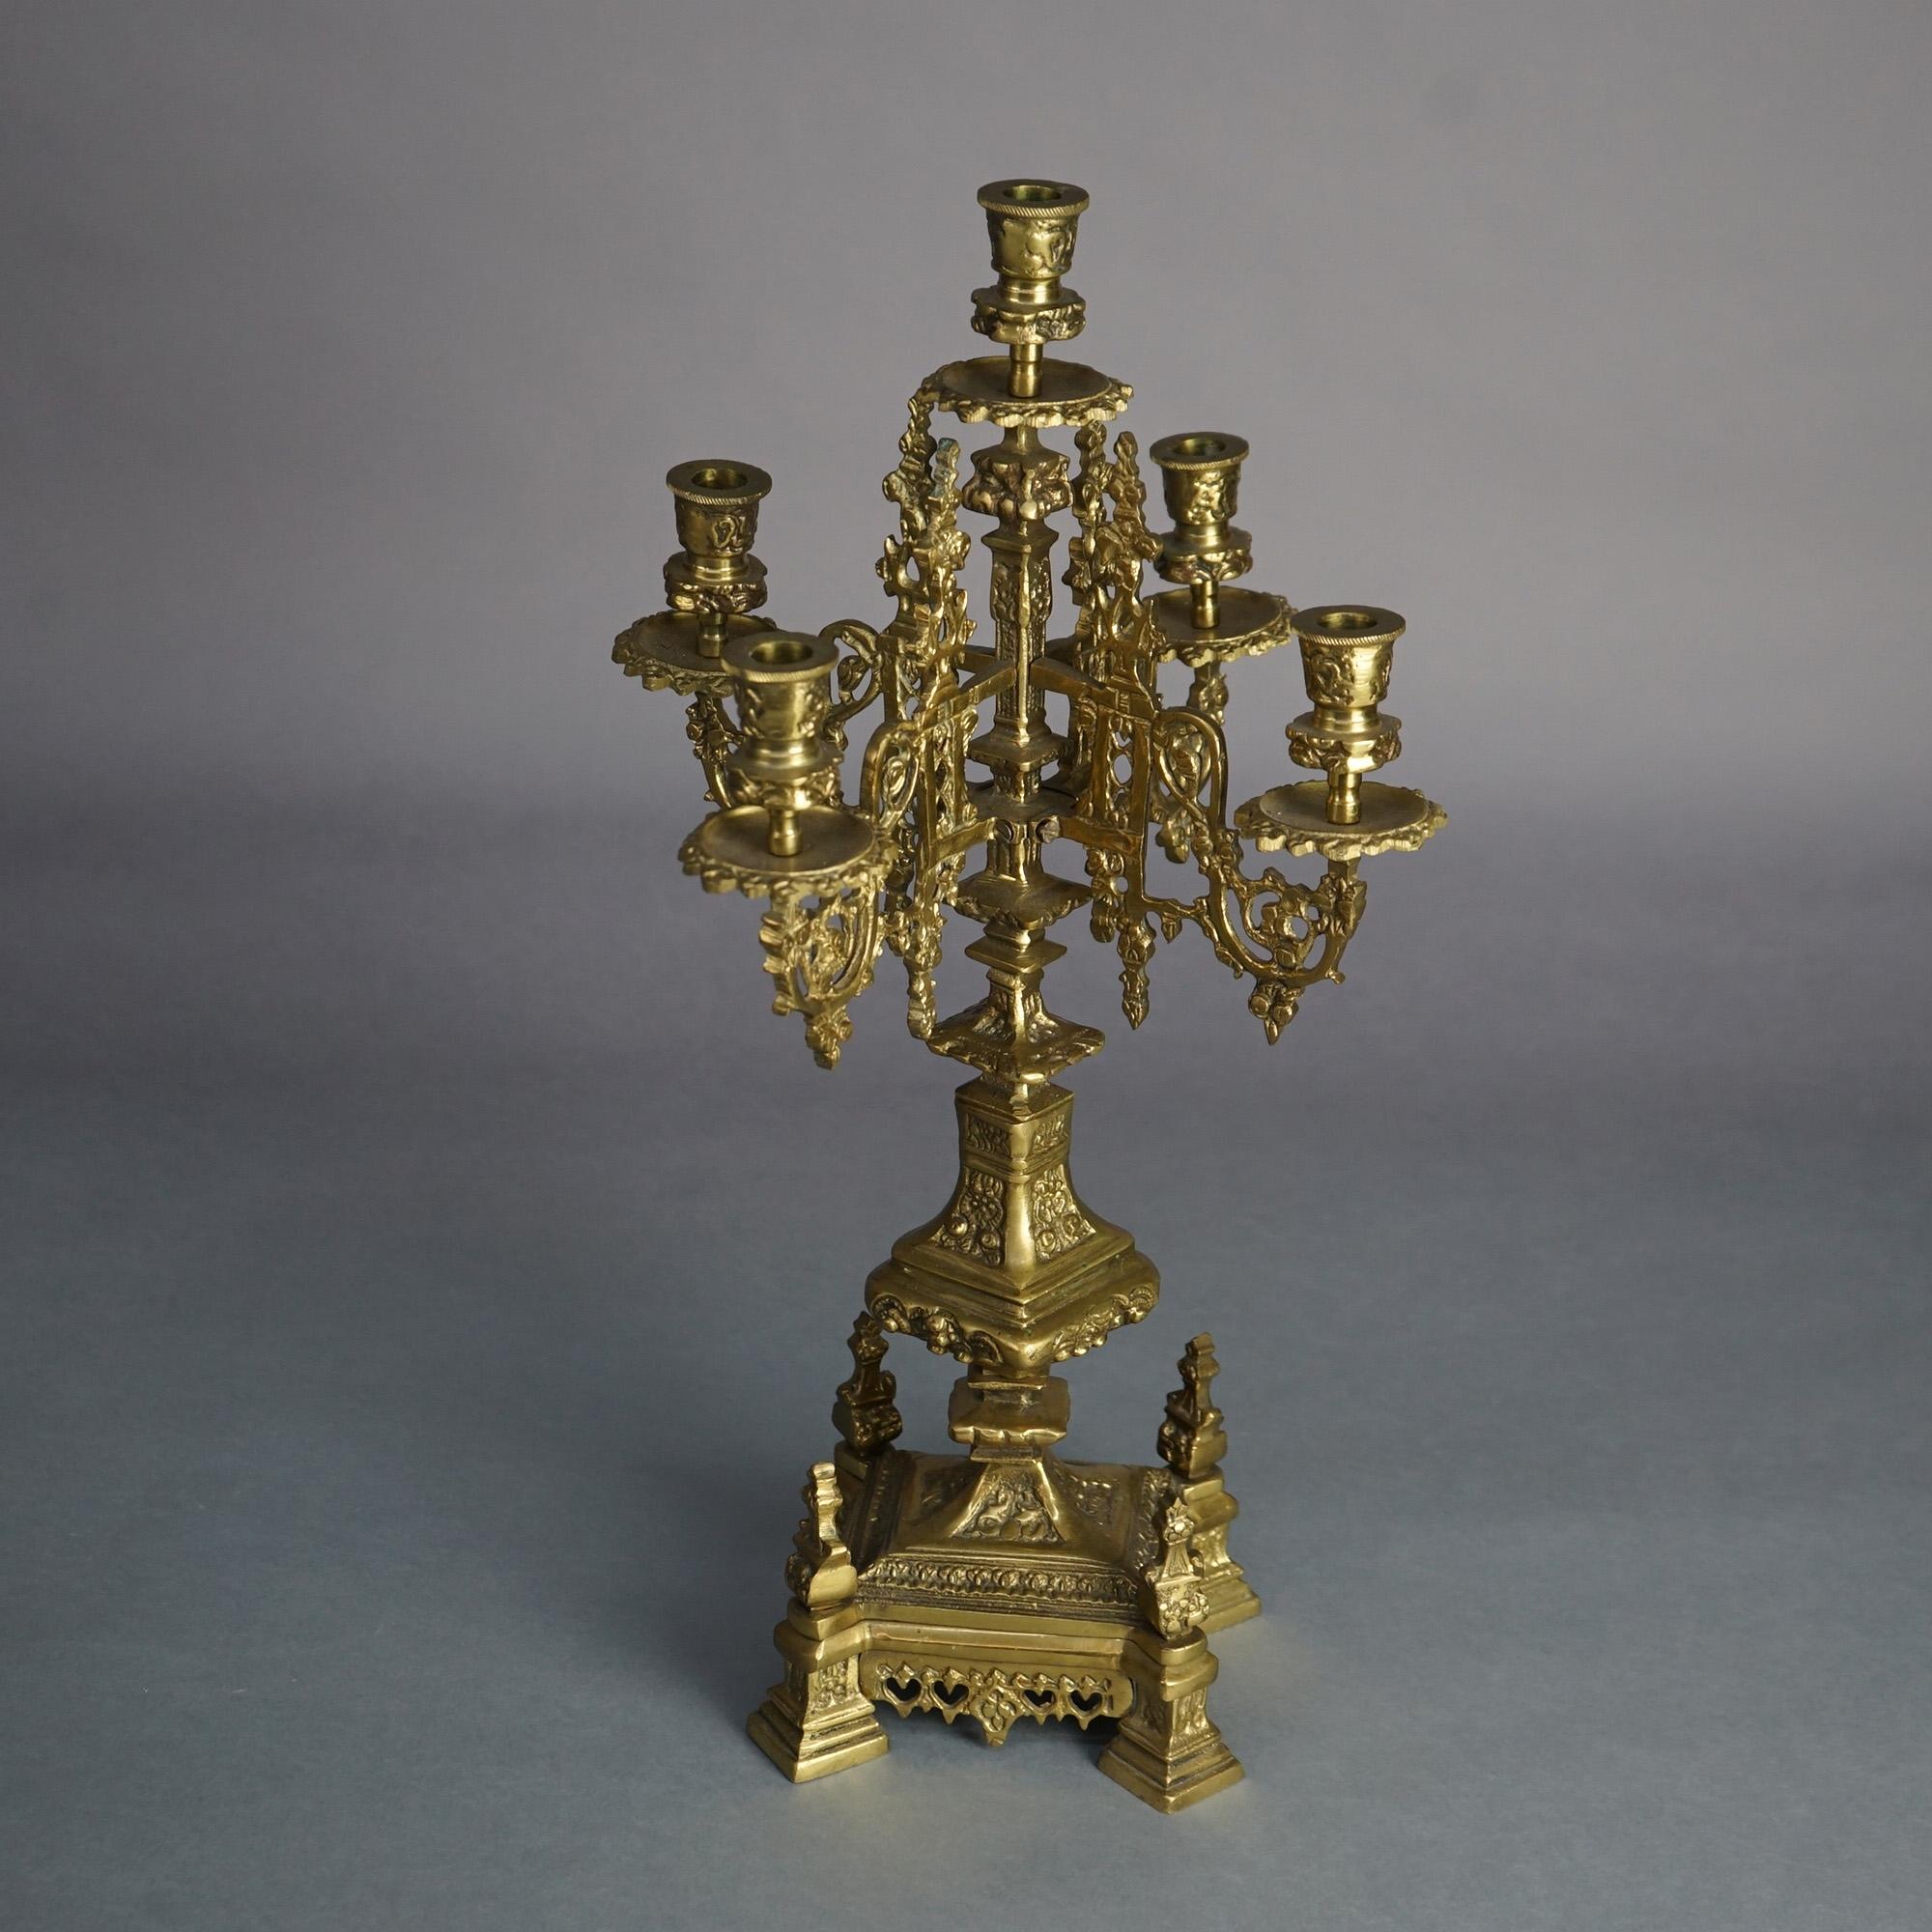 Antique Pair Gothic Revival Bronzed Five-Light & Footed Candelabra C1850 In Good Condition For Sale In Big Flats, NY